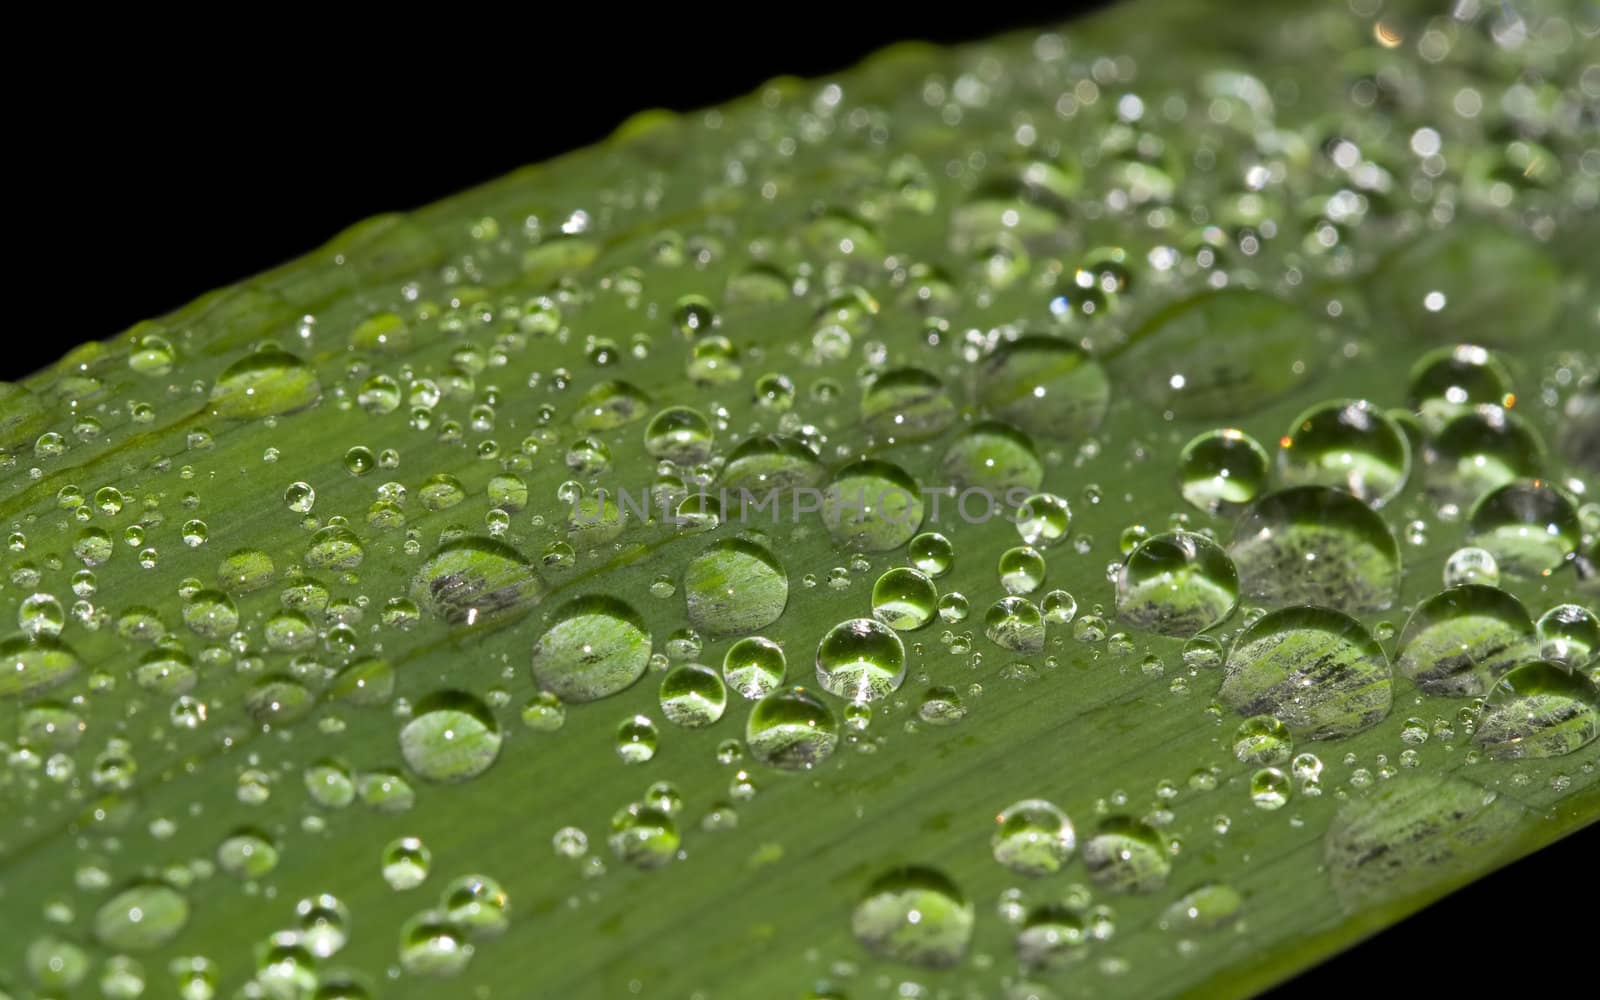 Drops on the leaf by Sazonoff